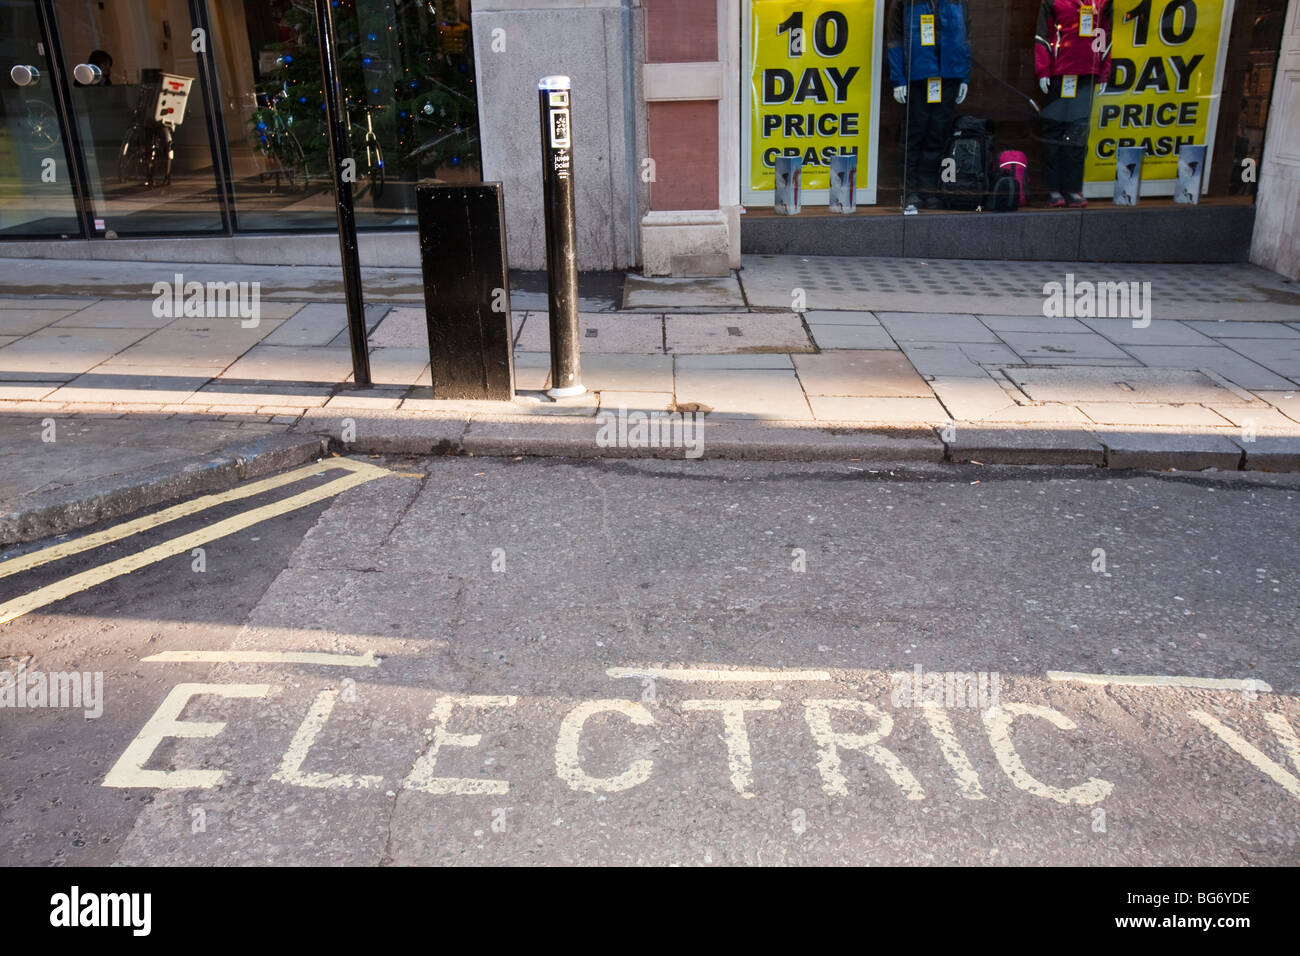 A street charging point for electric vehicles in Westminster, London, UK. Stock Photo